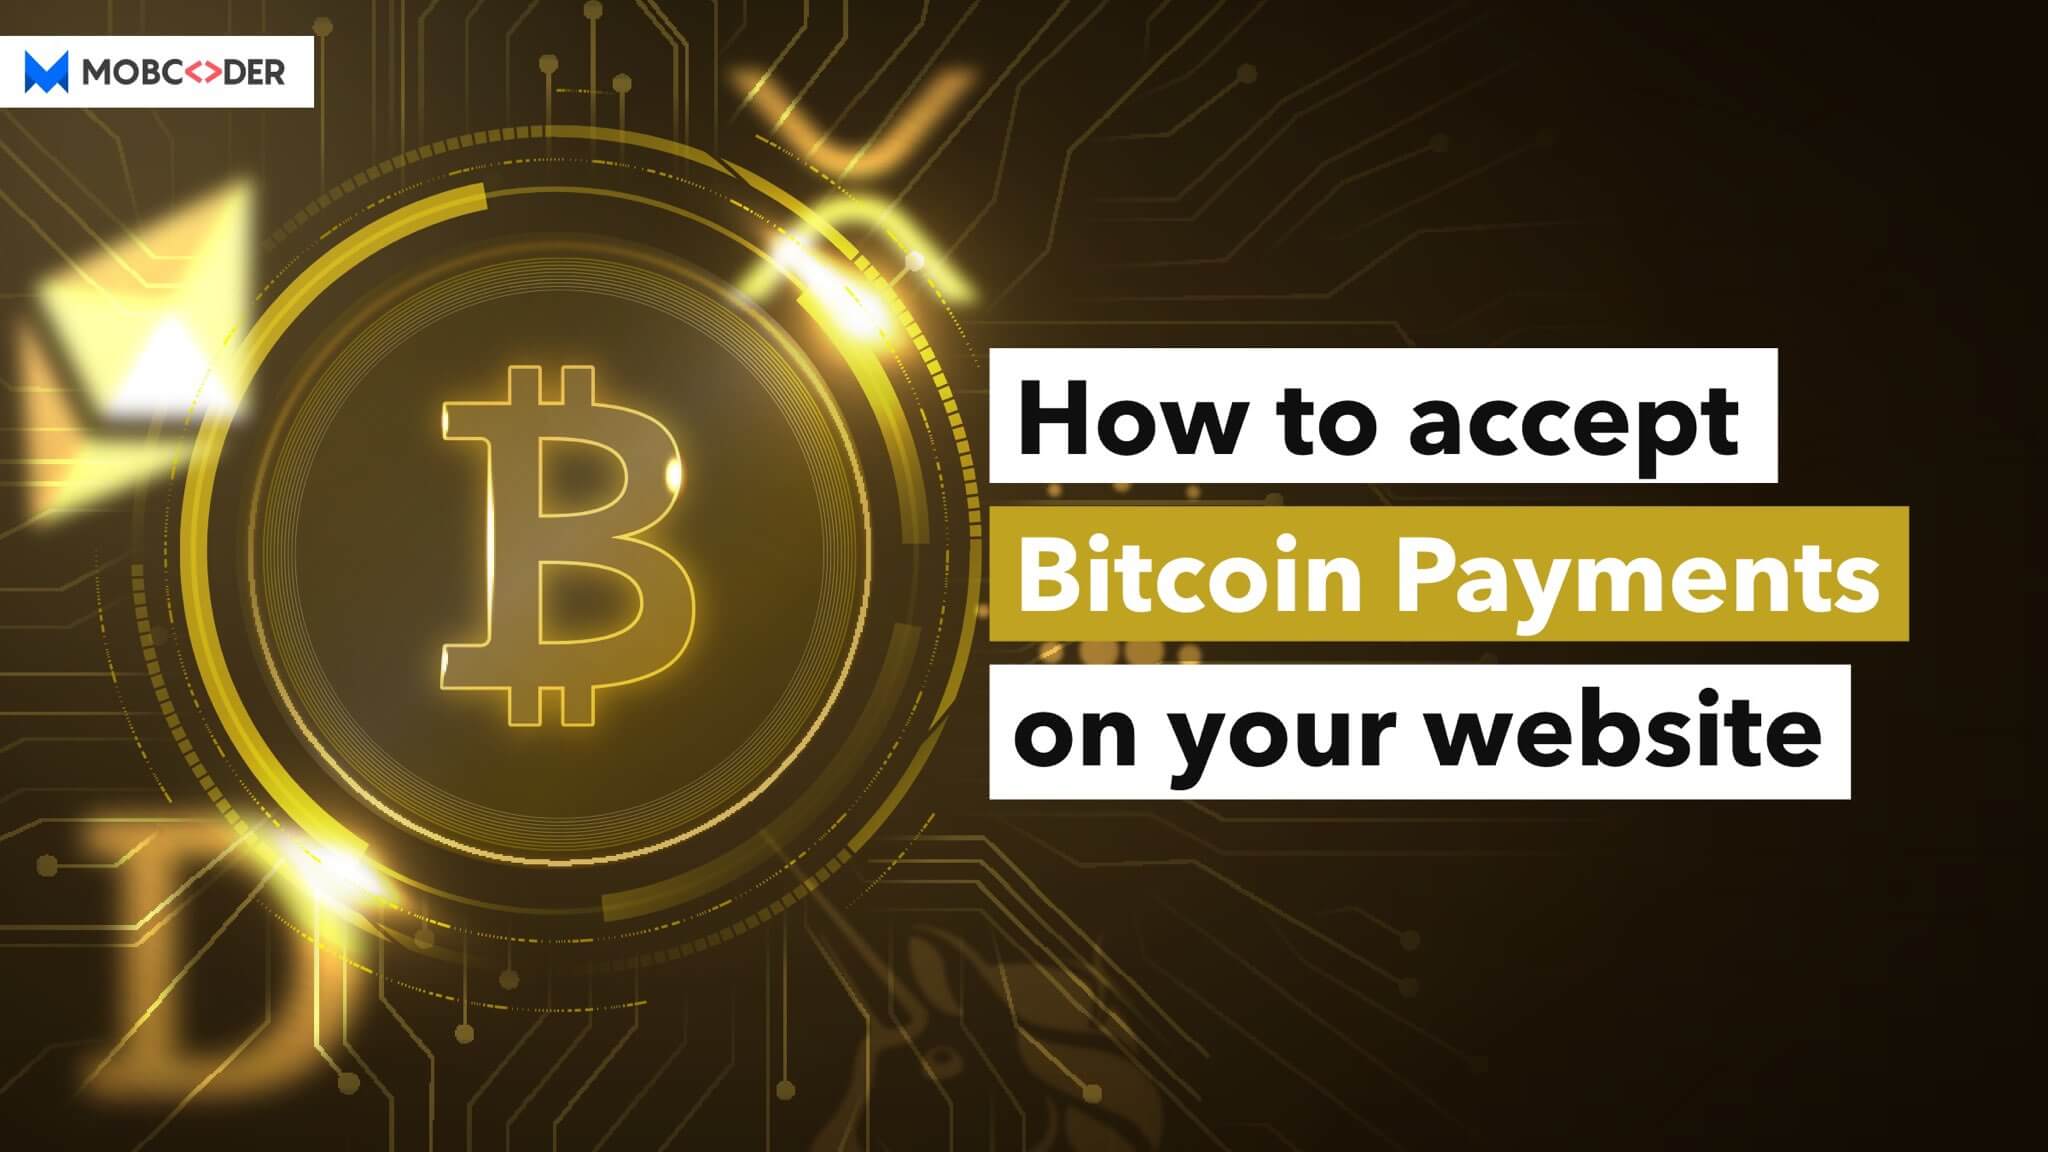 How to Accept Bitcoin Payments on Your Website